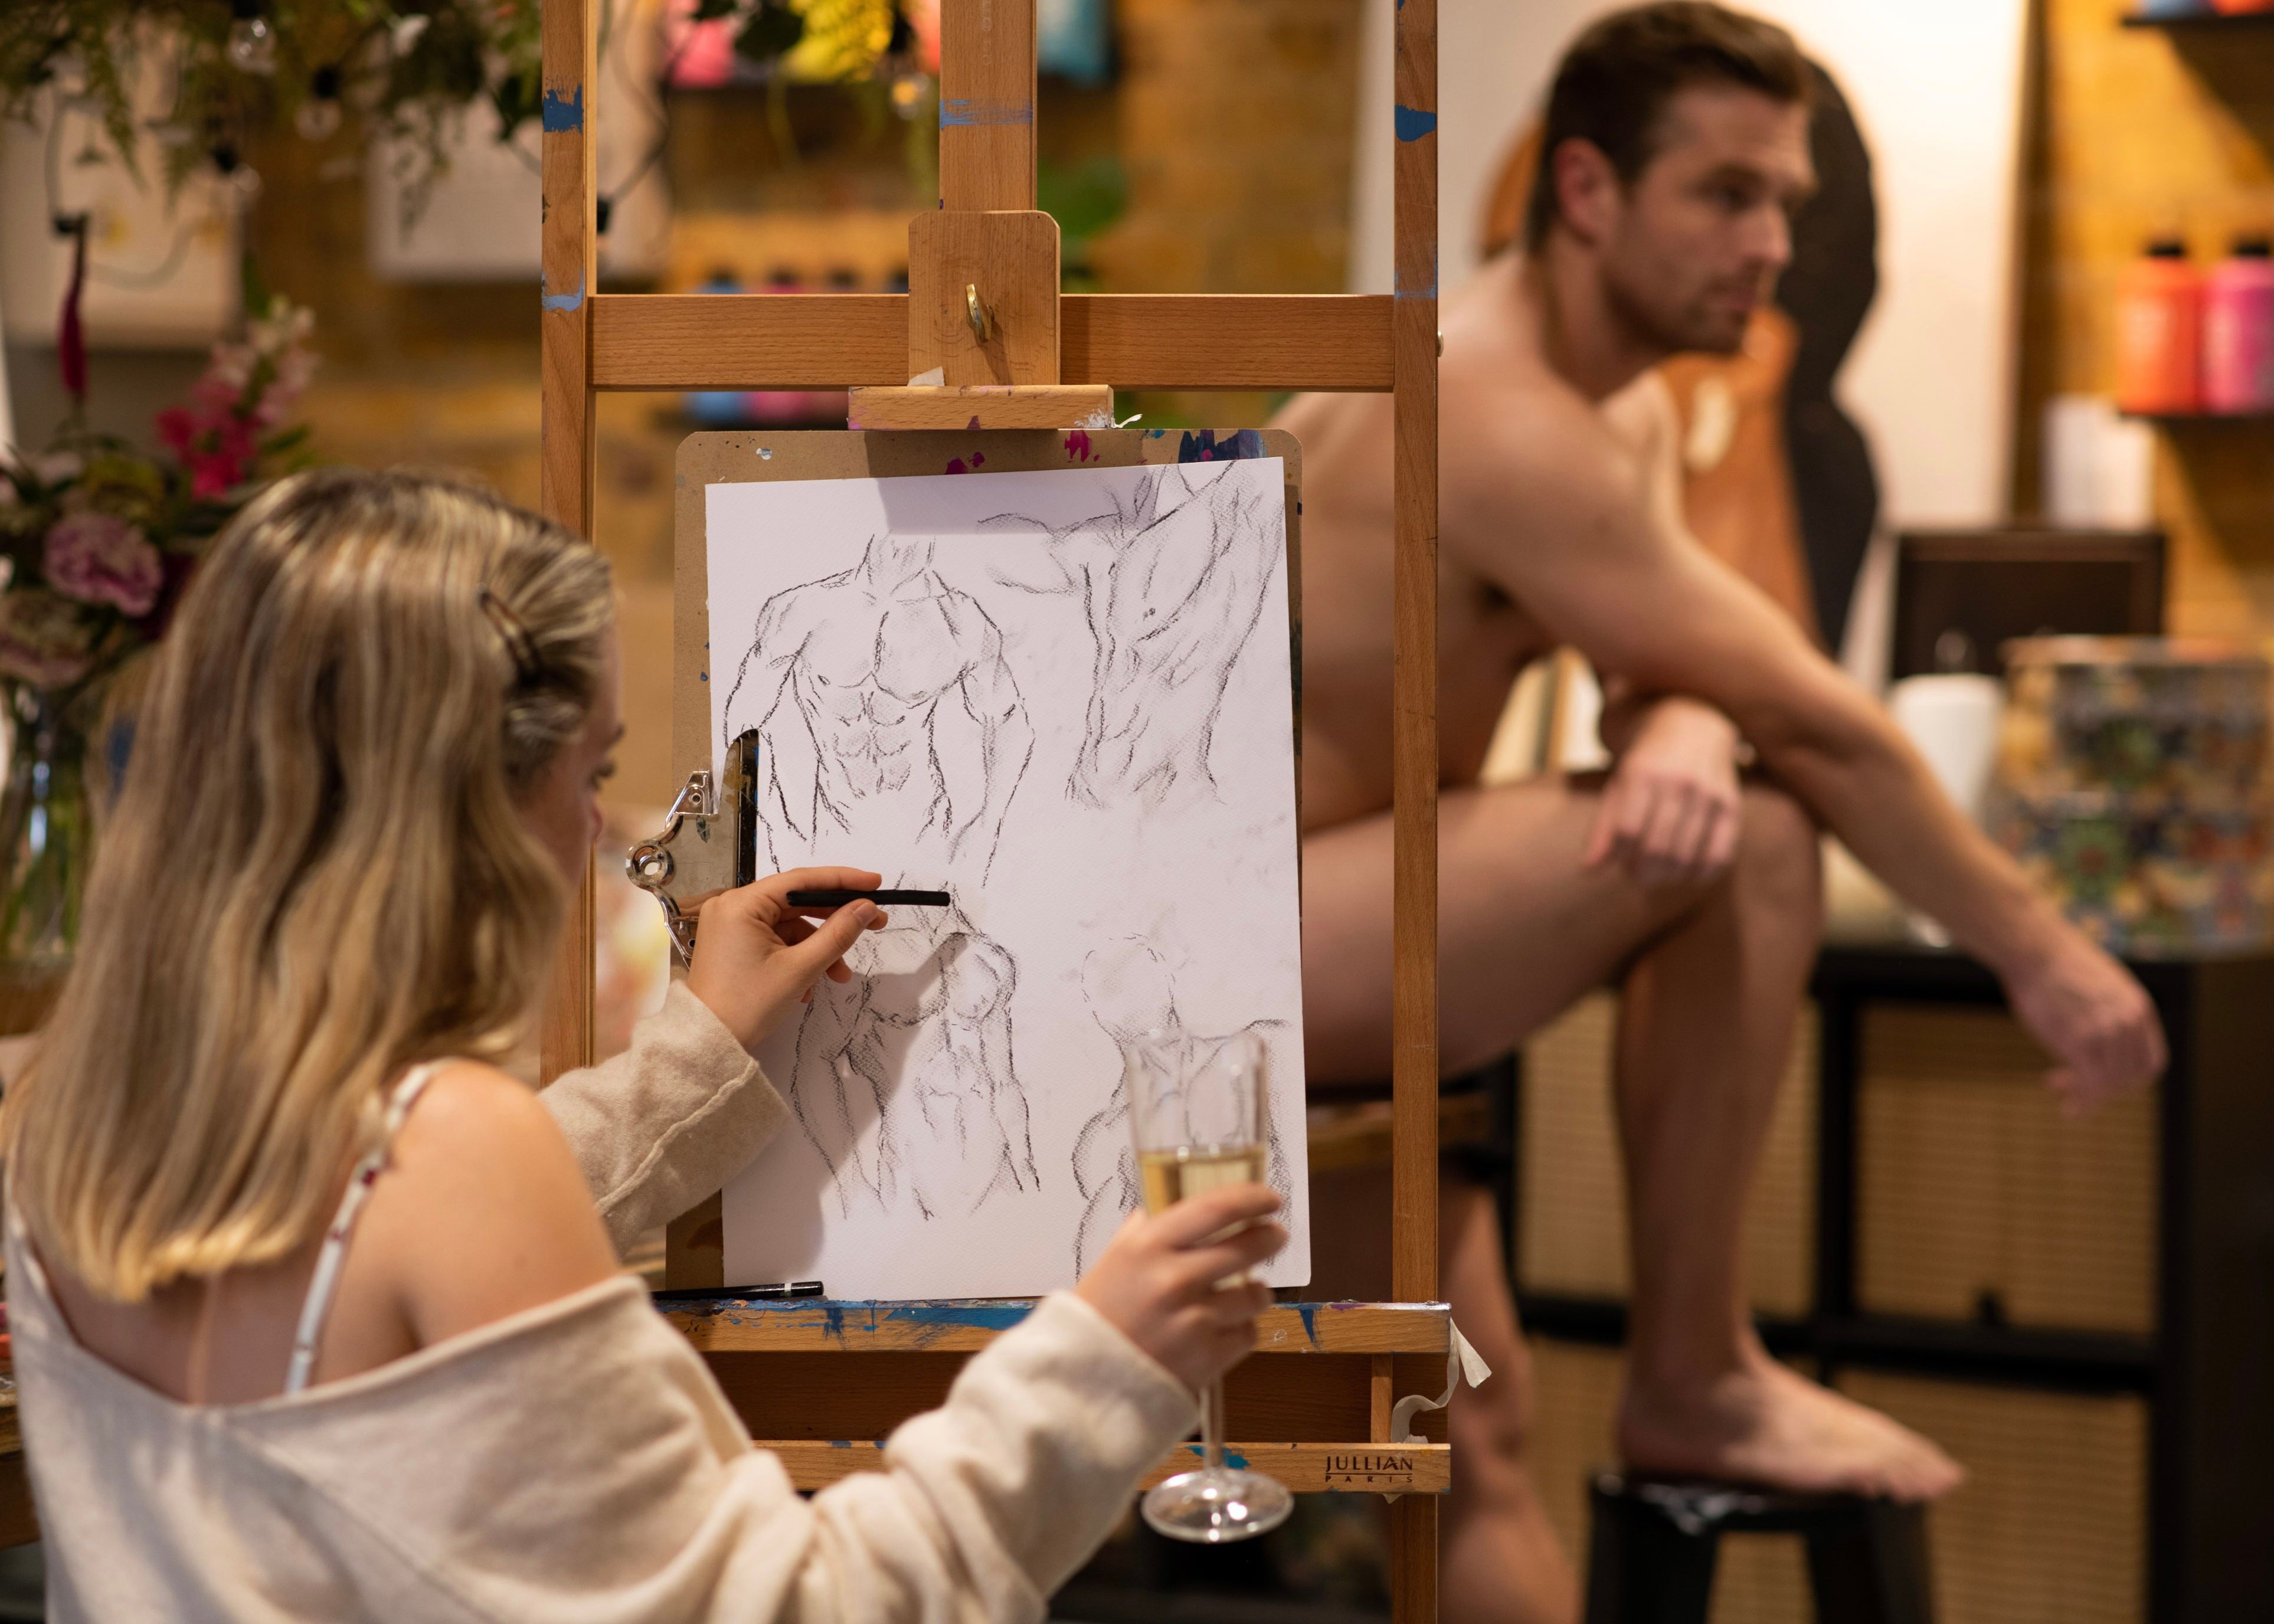 Sunday 13th March - Mindful Life Drawing